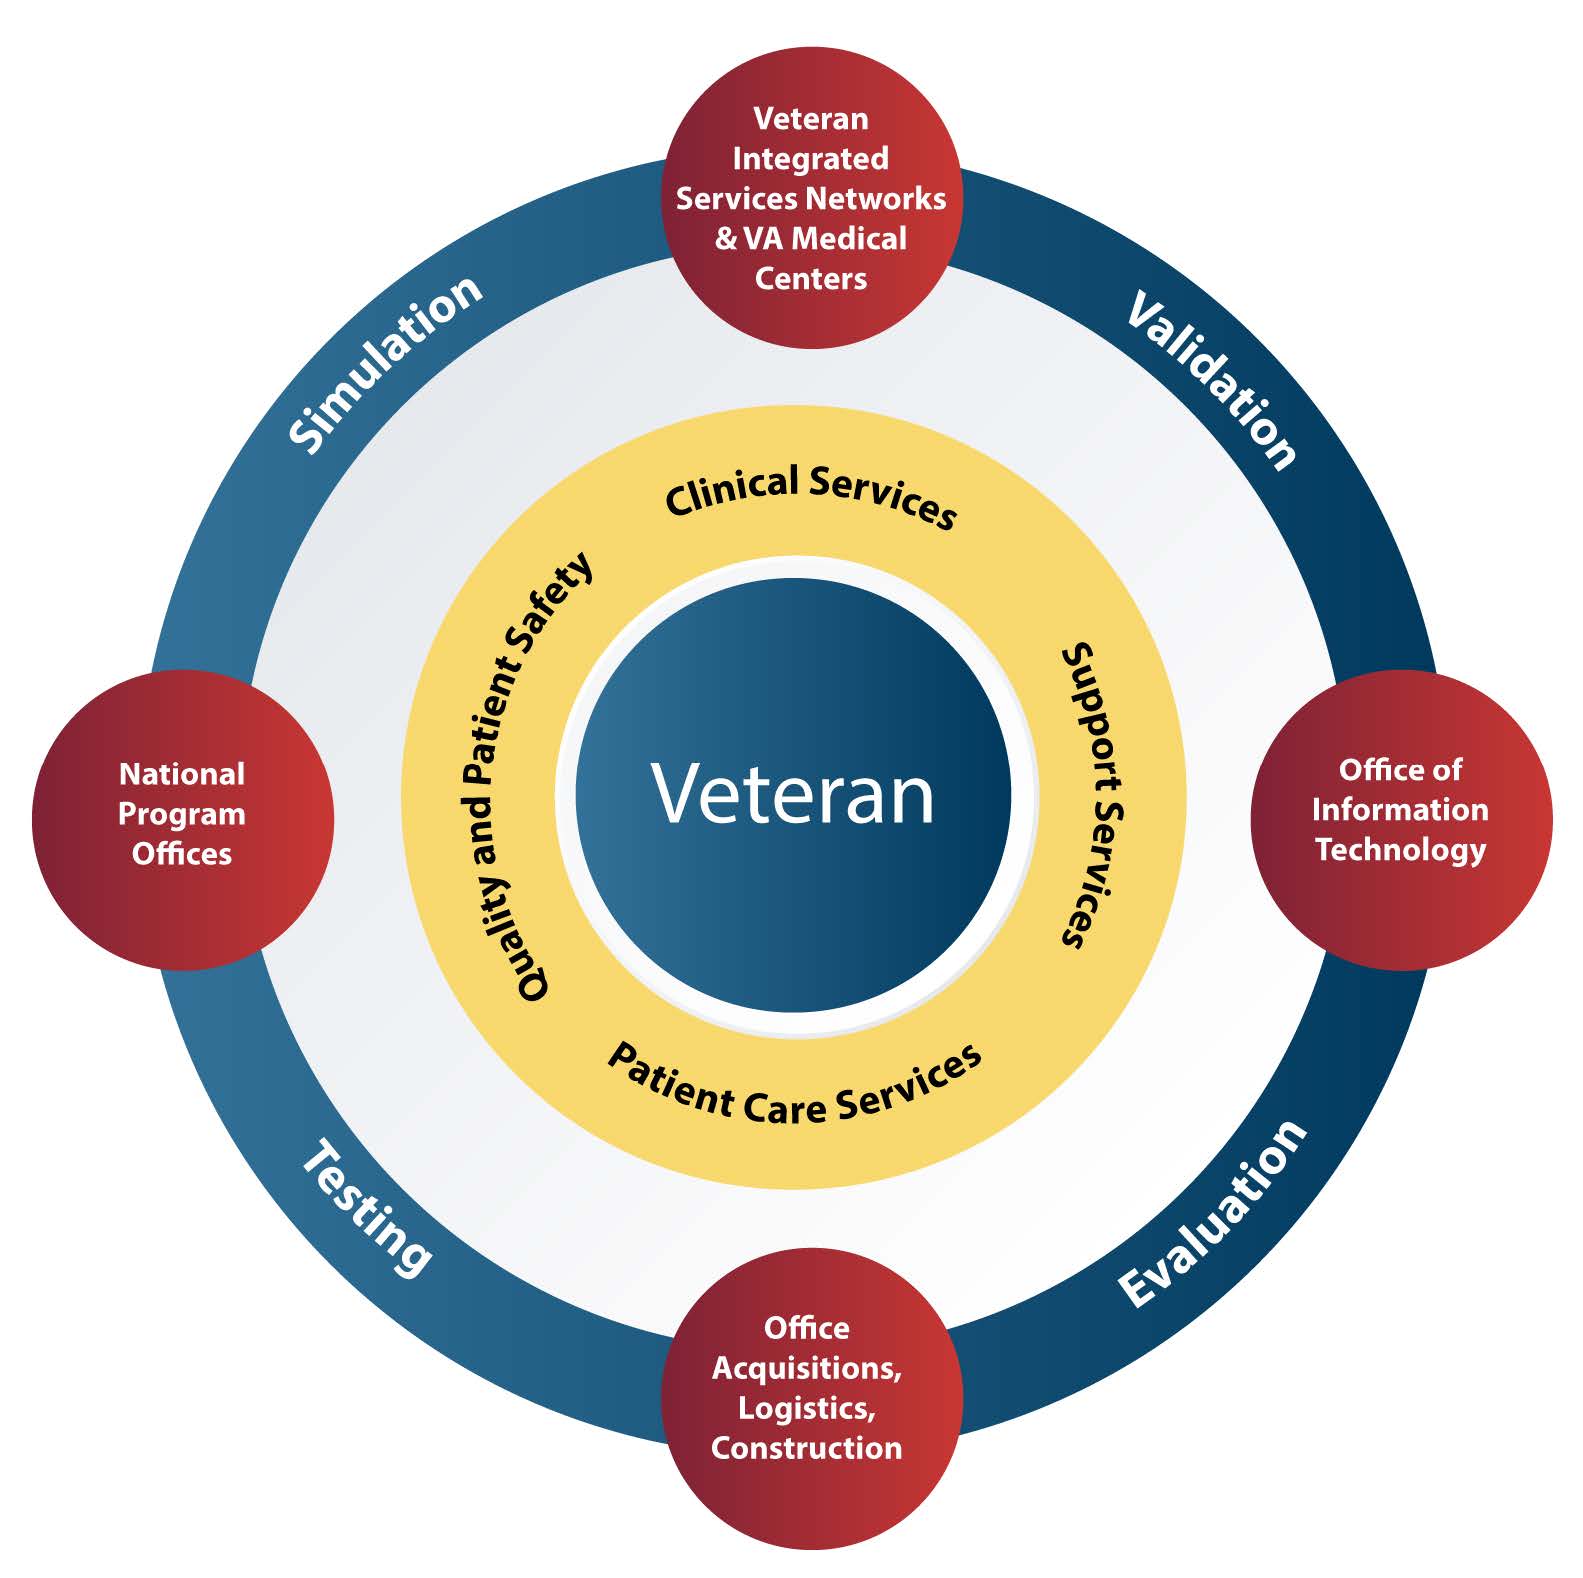 Infographic depicting SimVET as a program with concentric circles. On the outer ring, there are national program offices, the office of acquisition, logistics and construction, the office of information technology and Veteran Integrated service networks and VA medical centers. On the inner ring, there are services: clinical services, support services, patient care services, and quality and patient safety. In the center is the Veteran.